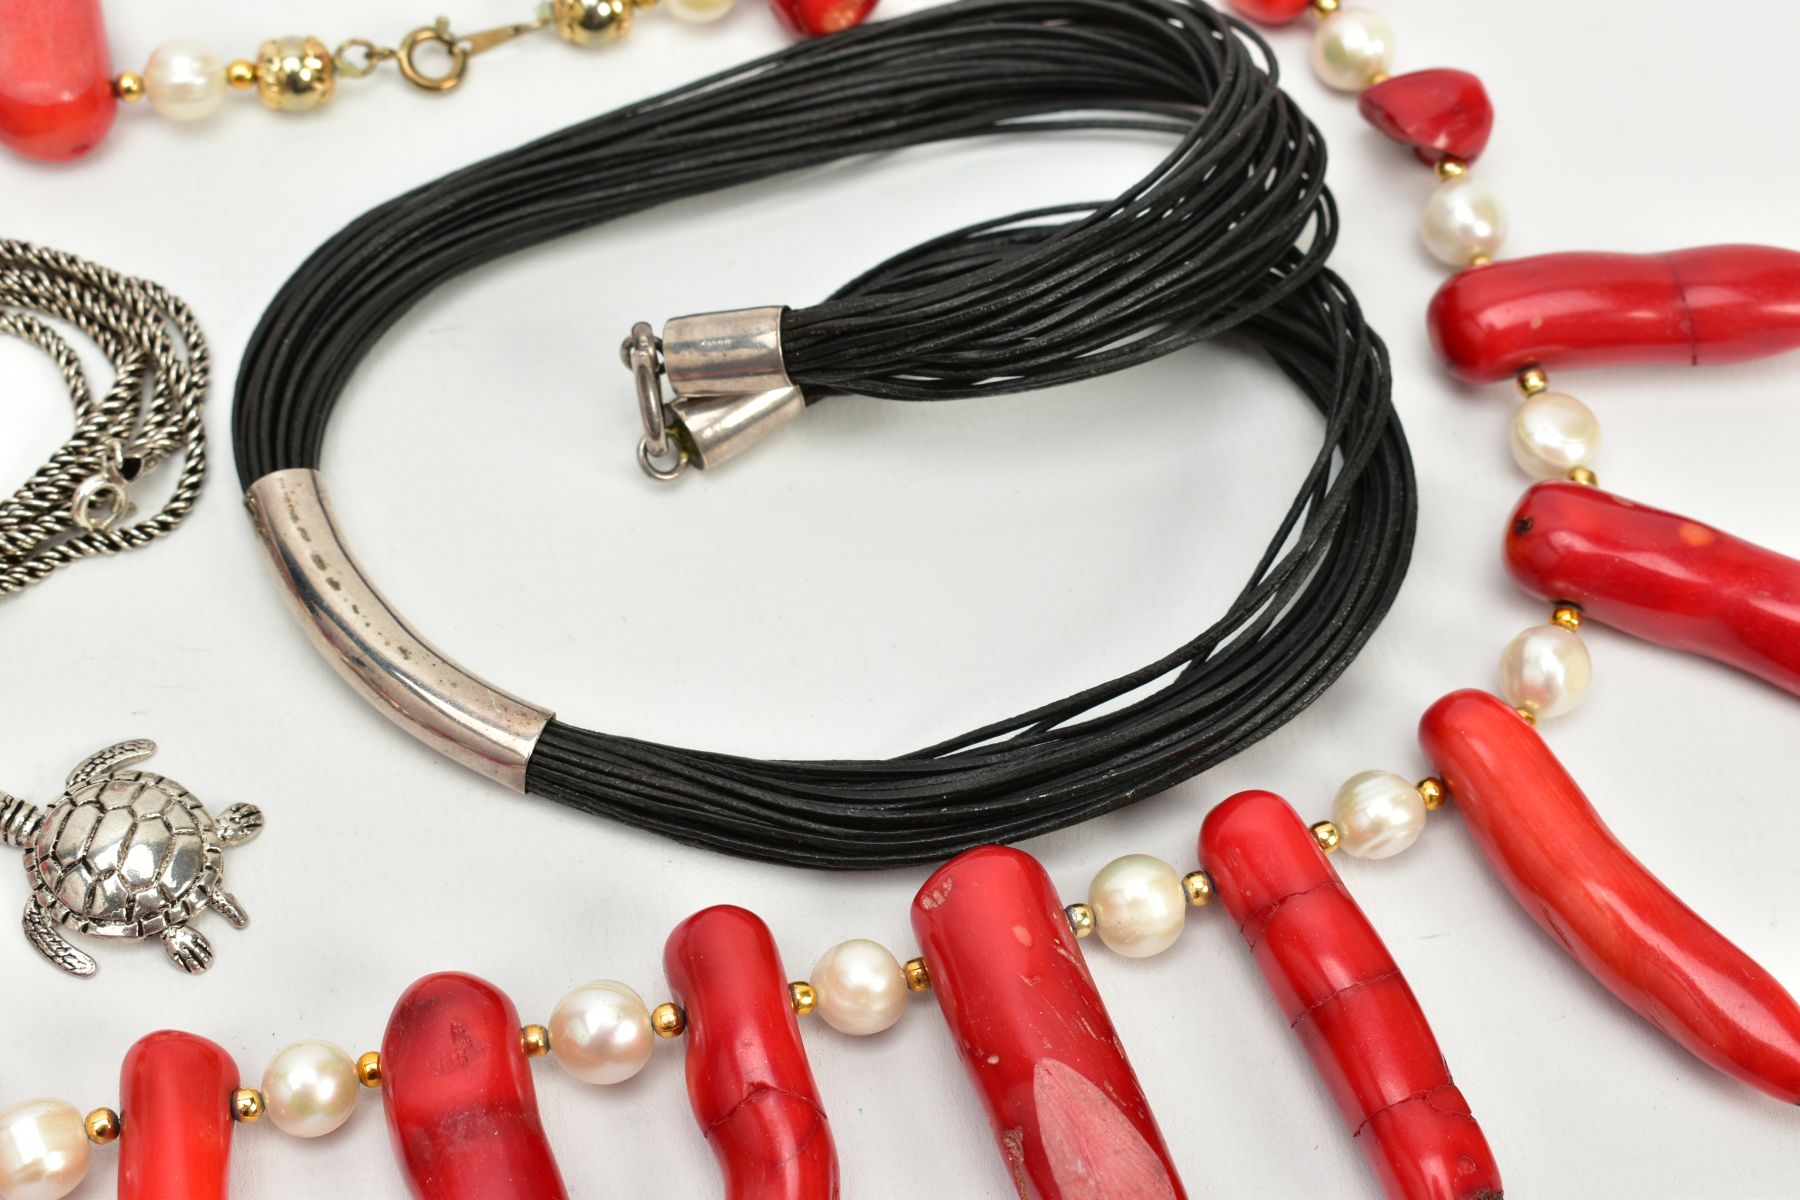 THREE ITEMS OF JEWELLERY, to include a large dyed coral and fresh water cultured pearl necklace, a - Image 3 of 5